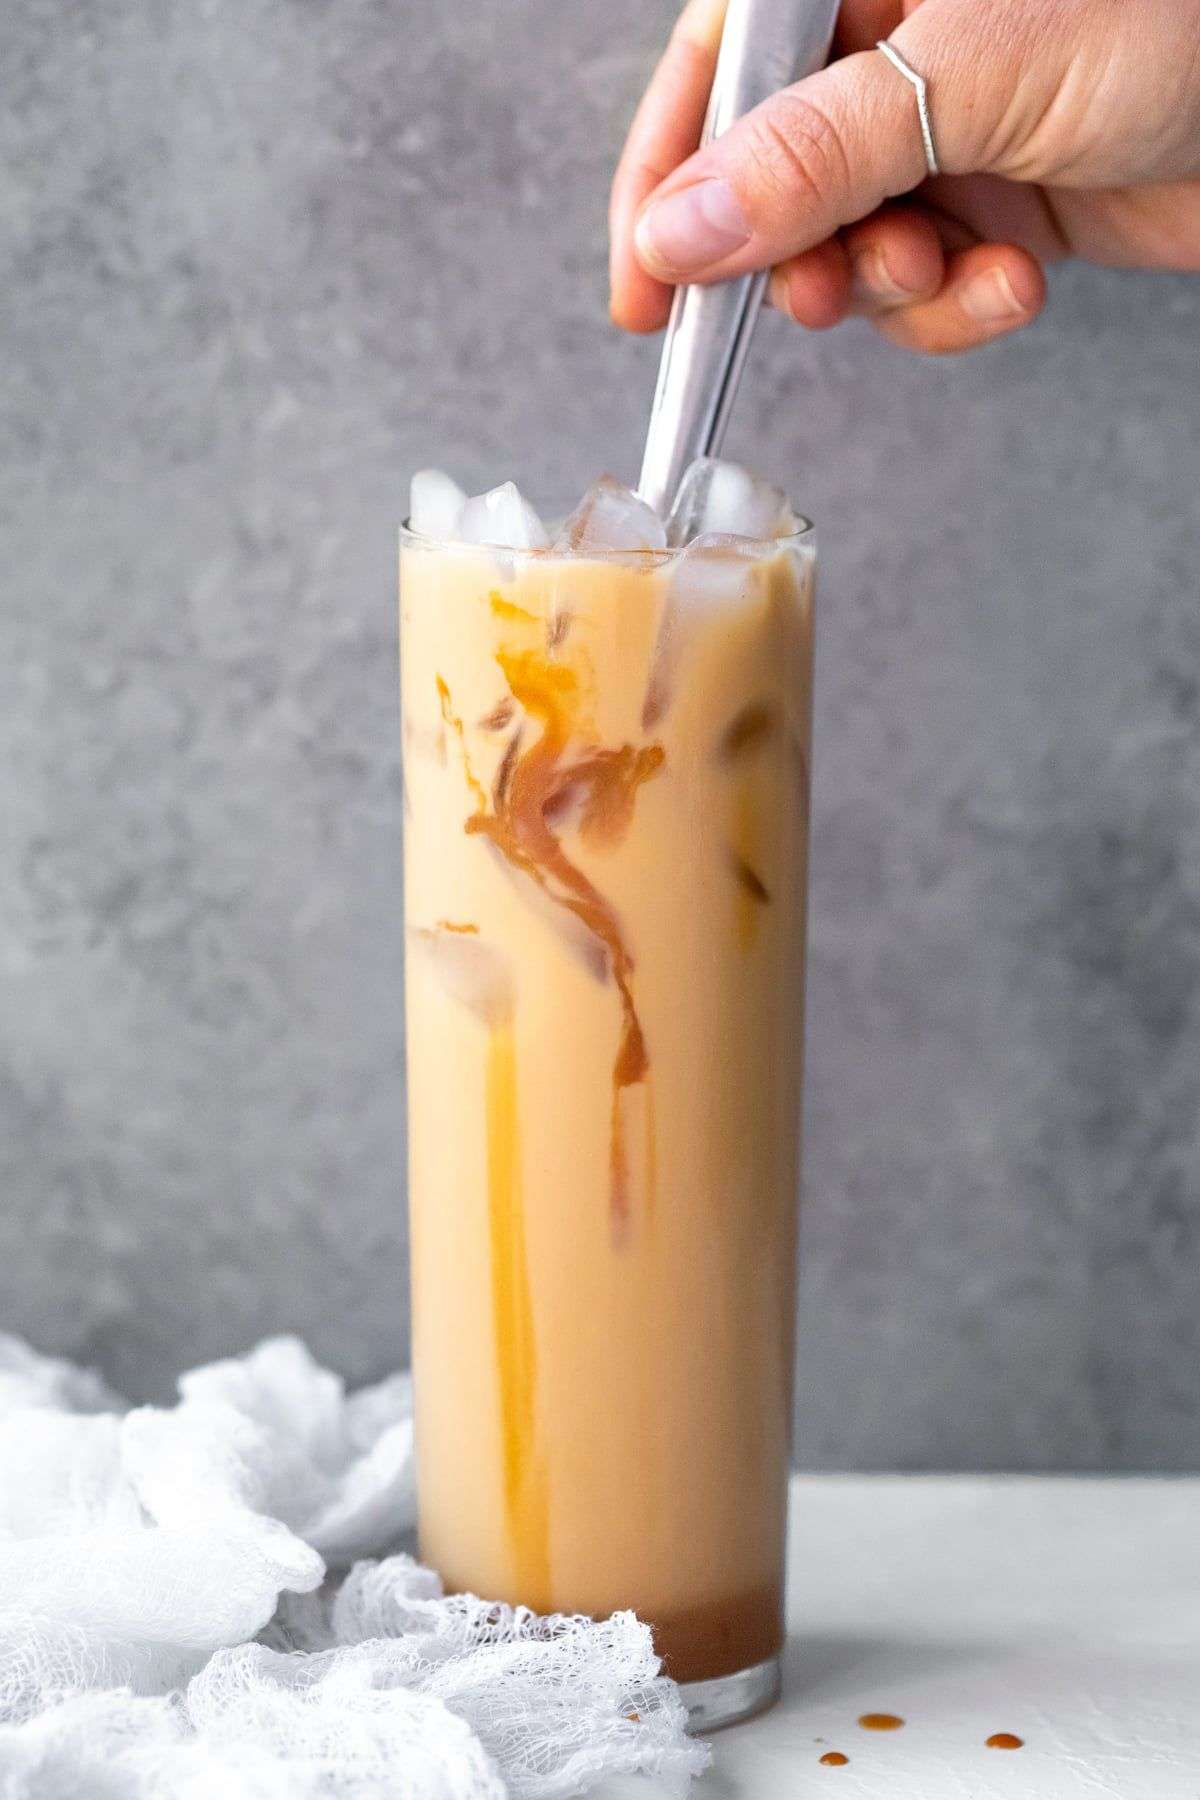 How To Make The Best Caramel Iced Coffee At Home in 2020 ...